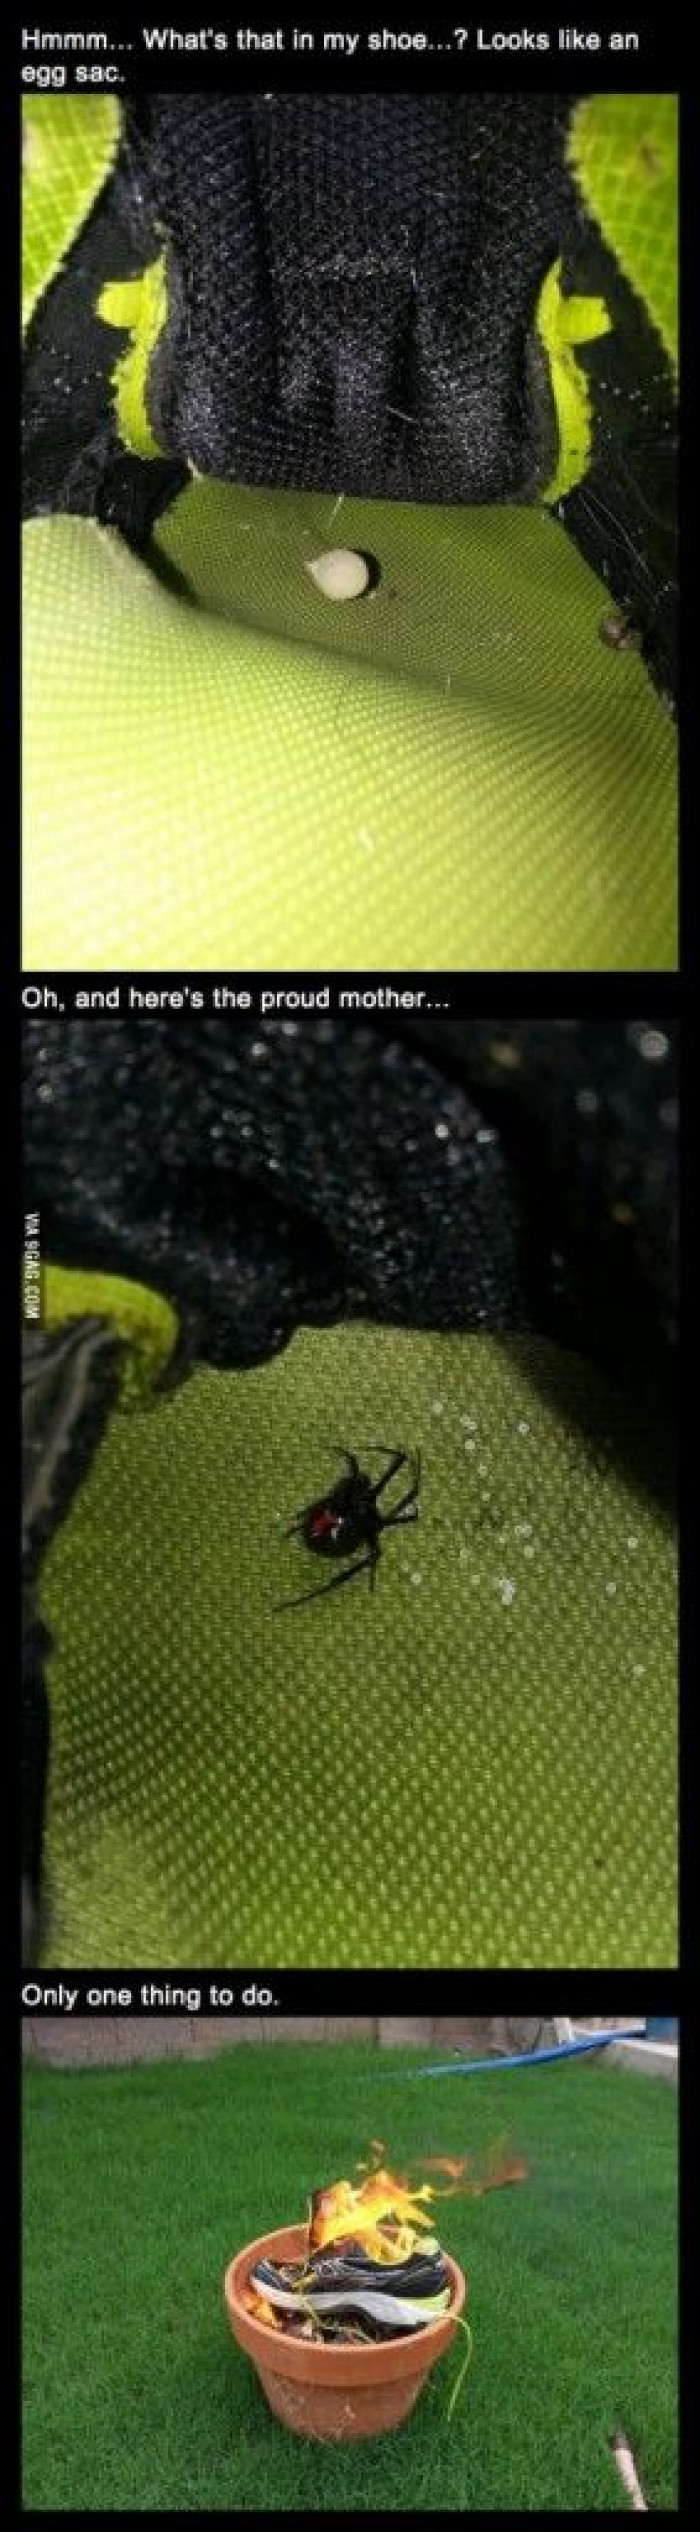 Oh there's a black widow and her babies in my shoe...